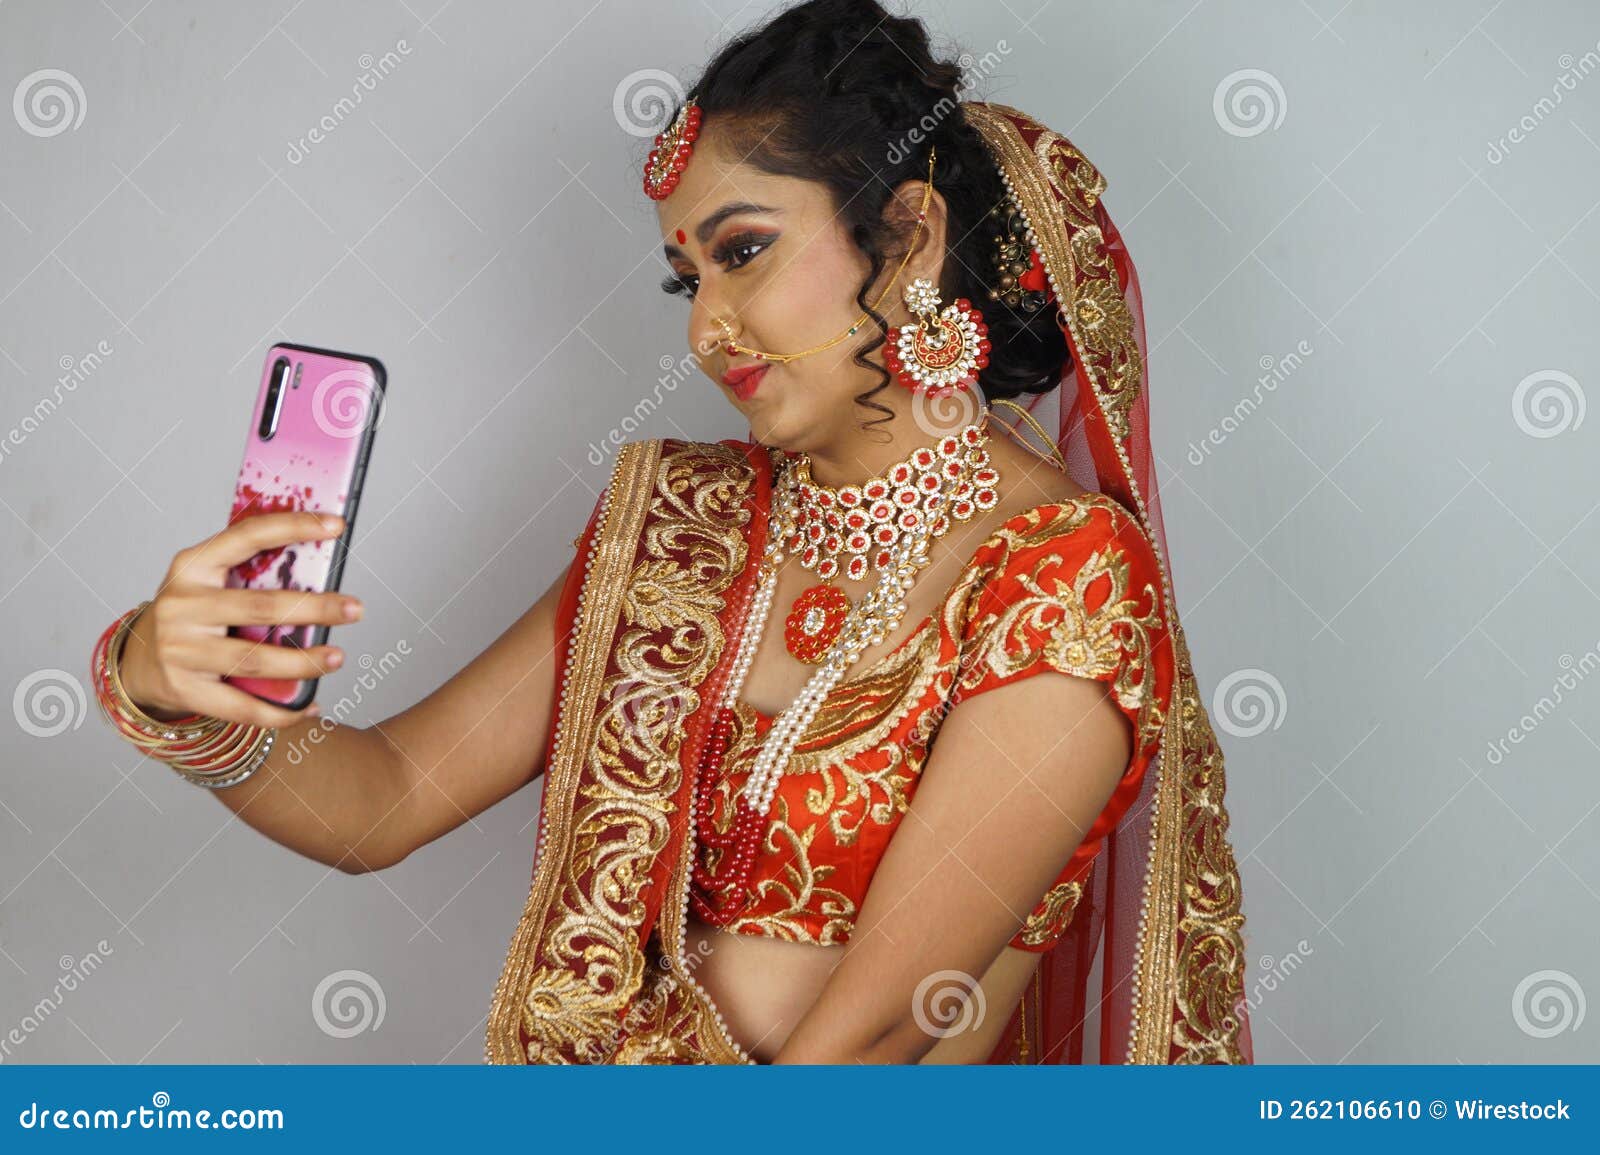 Bridal Makeup Hairstyle by Sandhya's Makeover | Bridestory.com